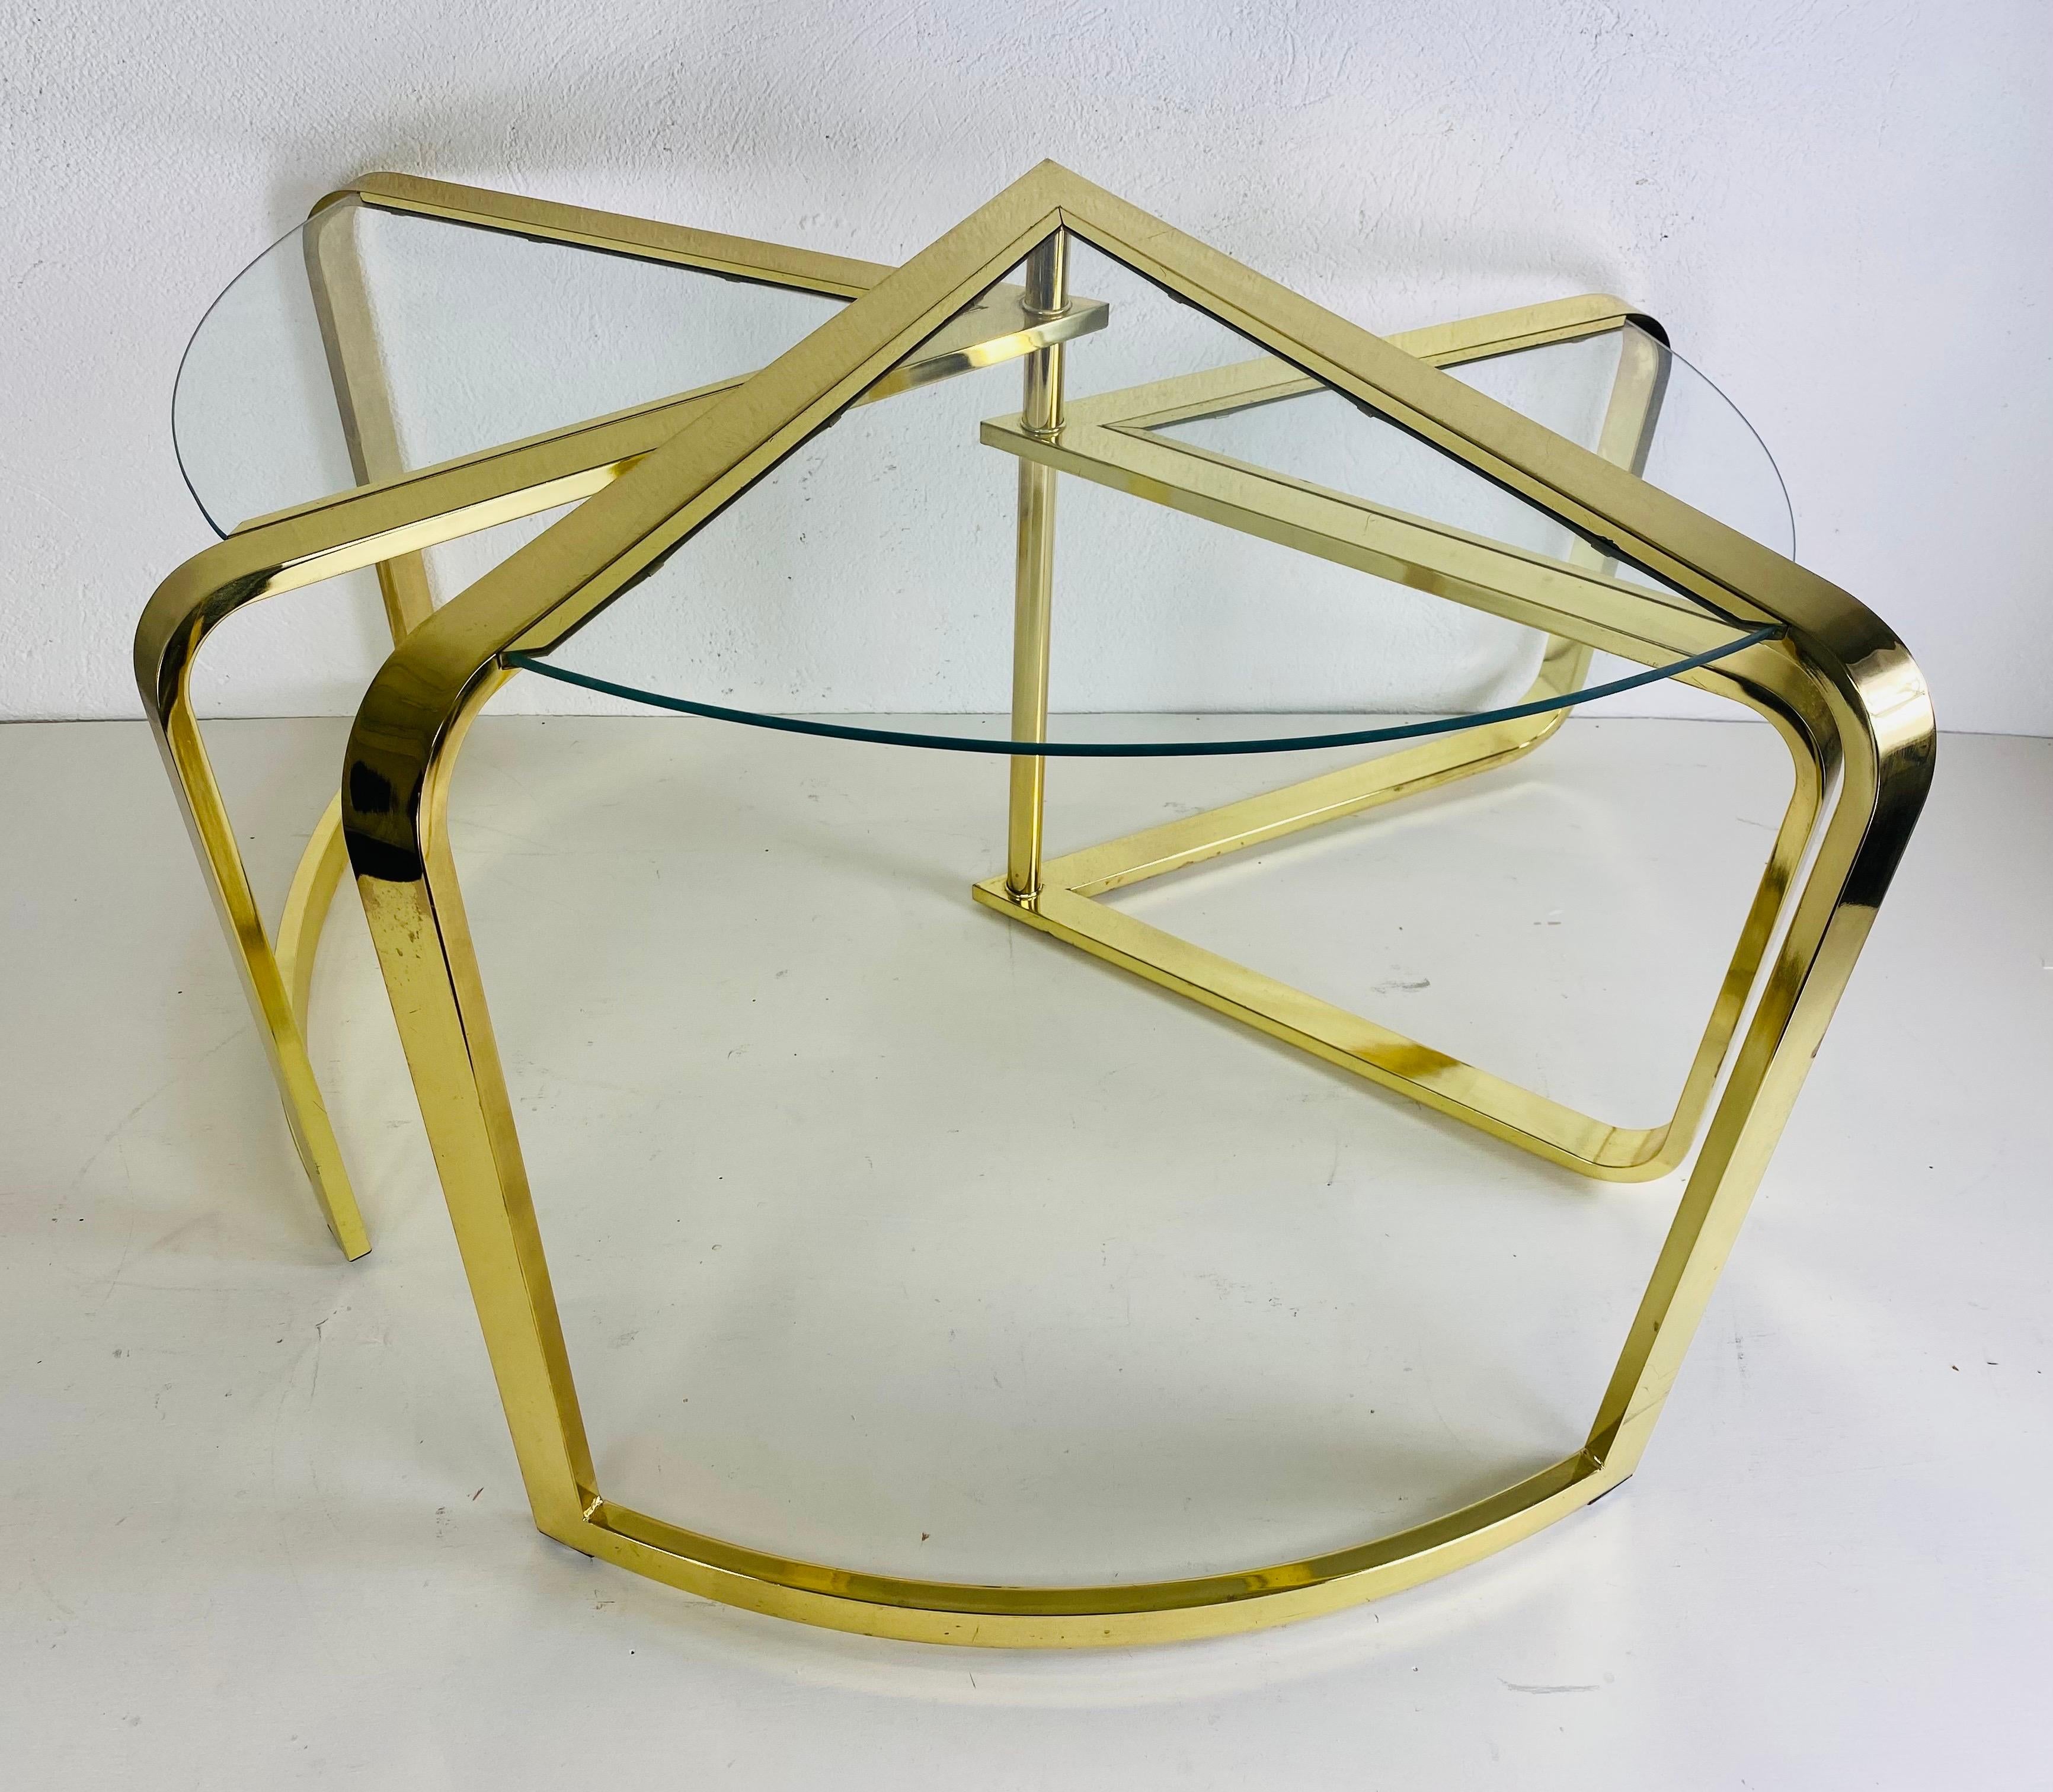 This is a mid century modernist brass nesting table by design Institute of America. This unique nesting table fans out from a single pole on the back end of the table. The table has three sections that graduate large to small. This unique mid